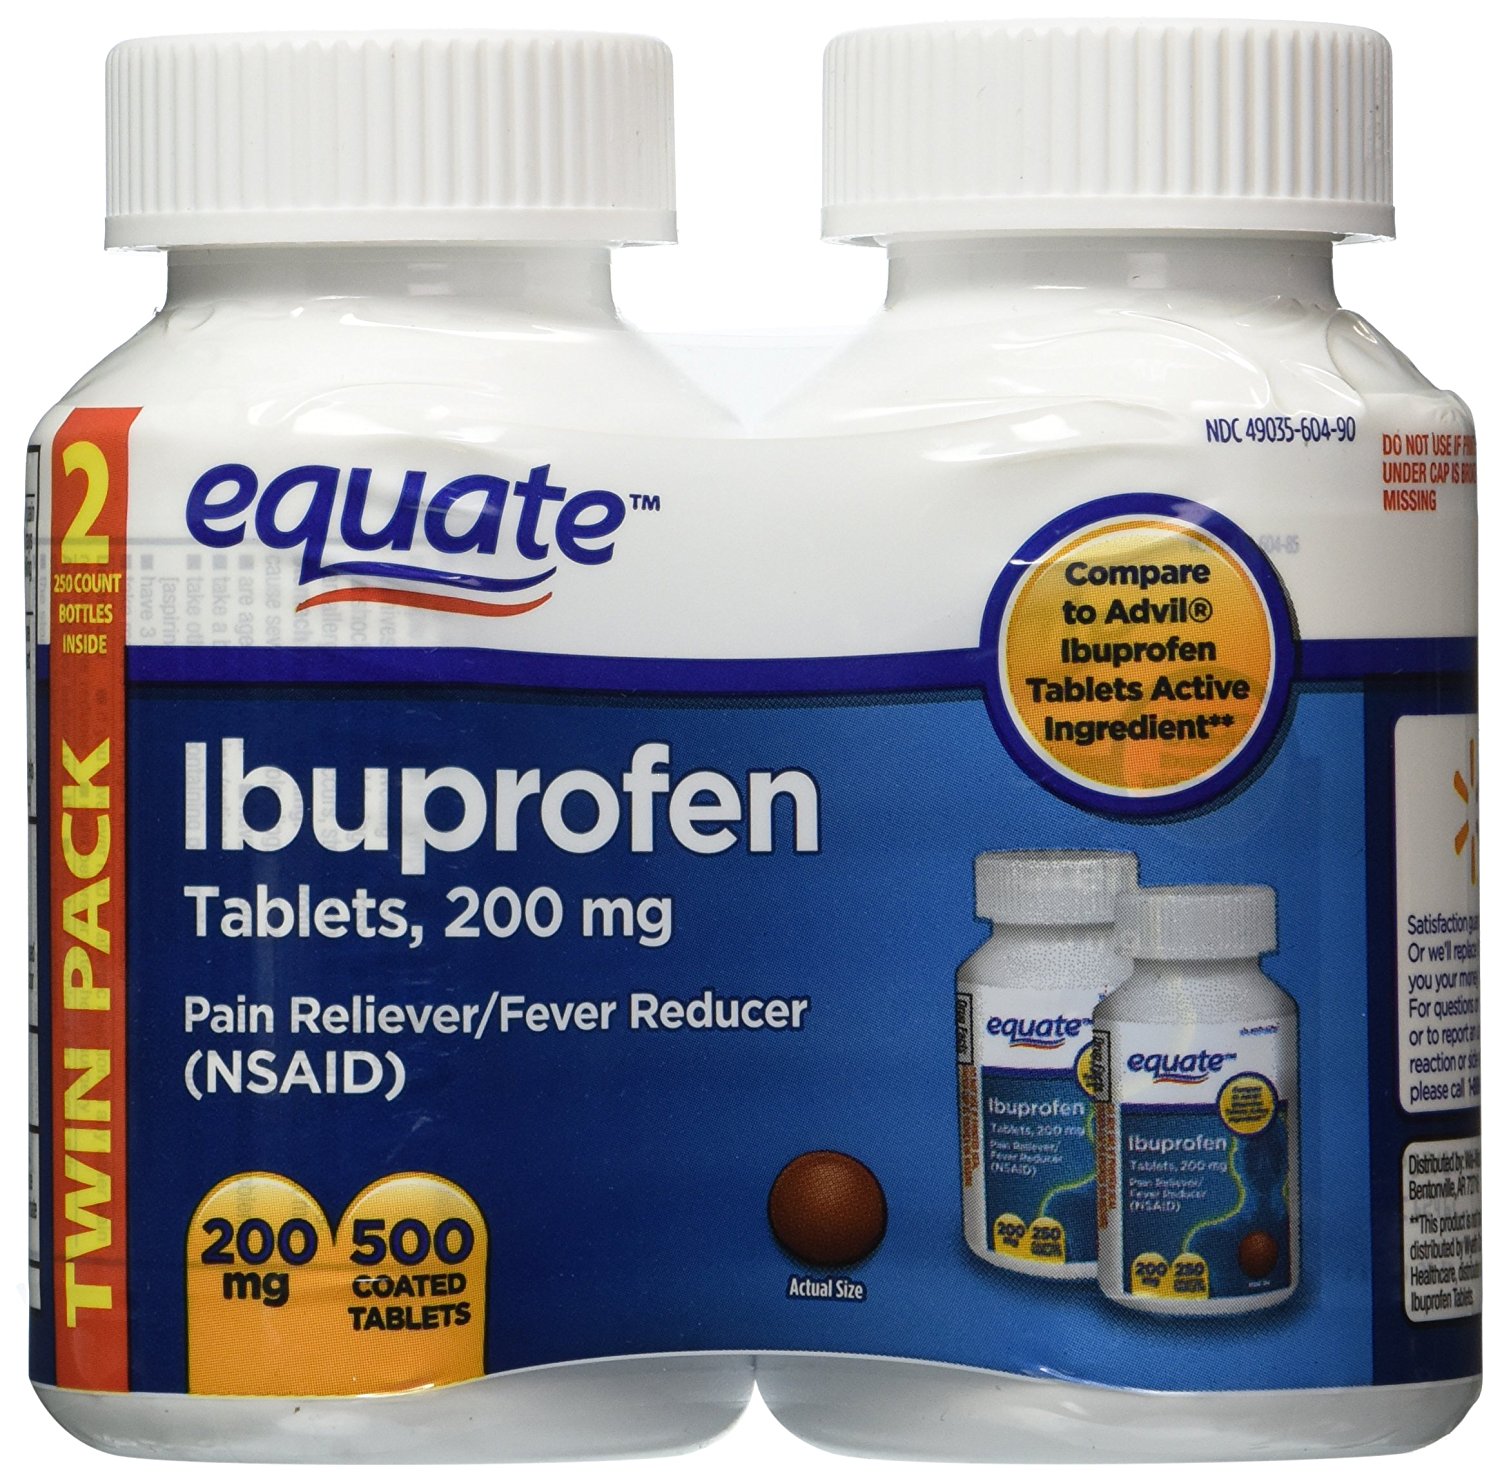 Doctors Warning People To Stop Taking Ibuprofen Due To Dangerous Side ...